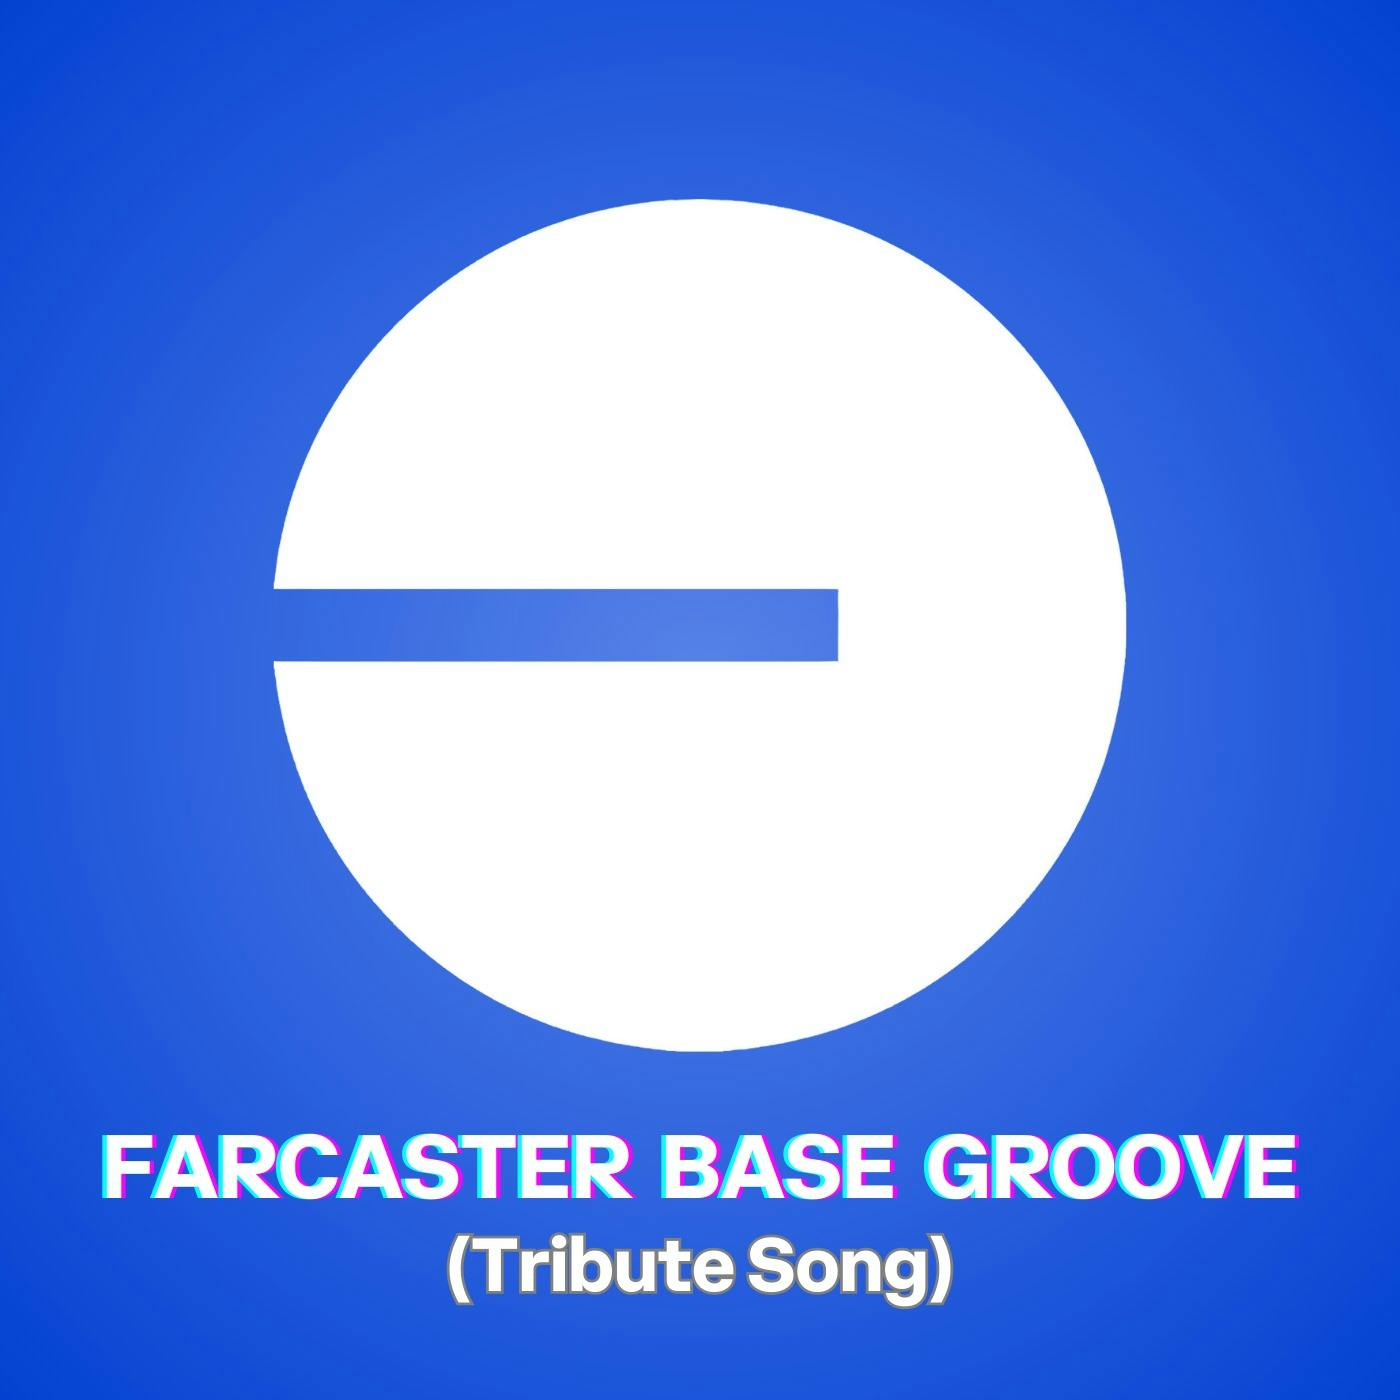 Farcaster Base Groove